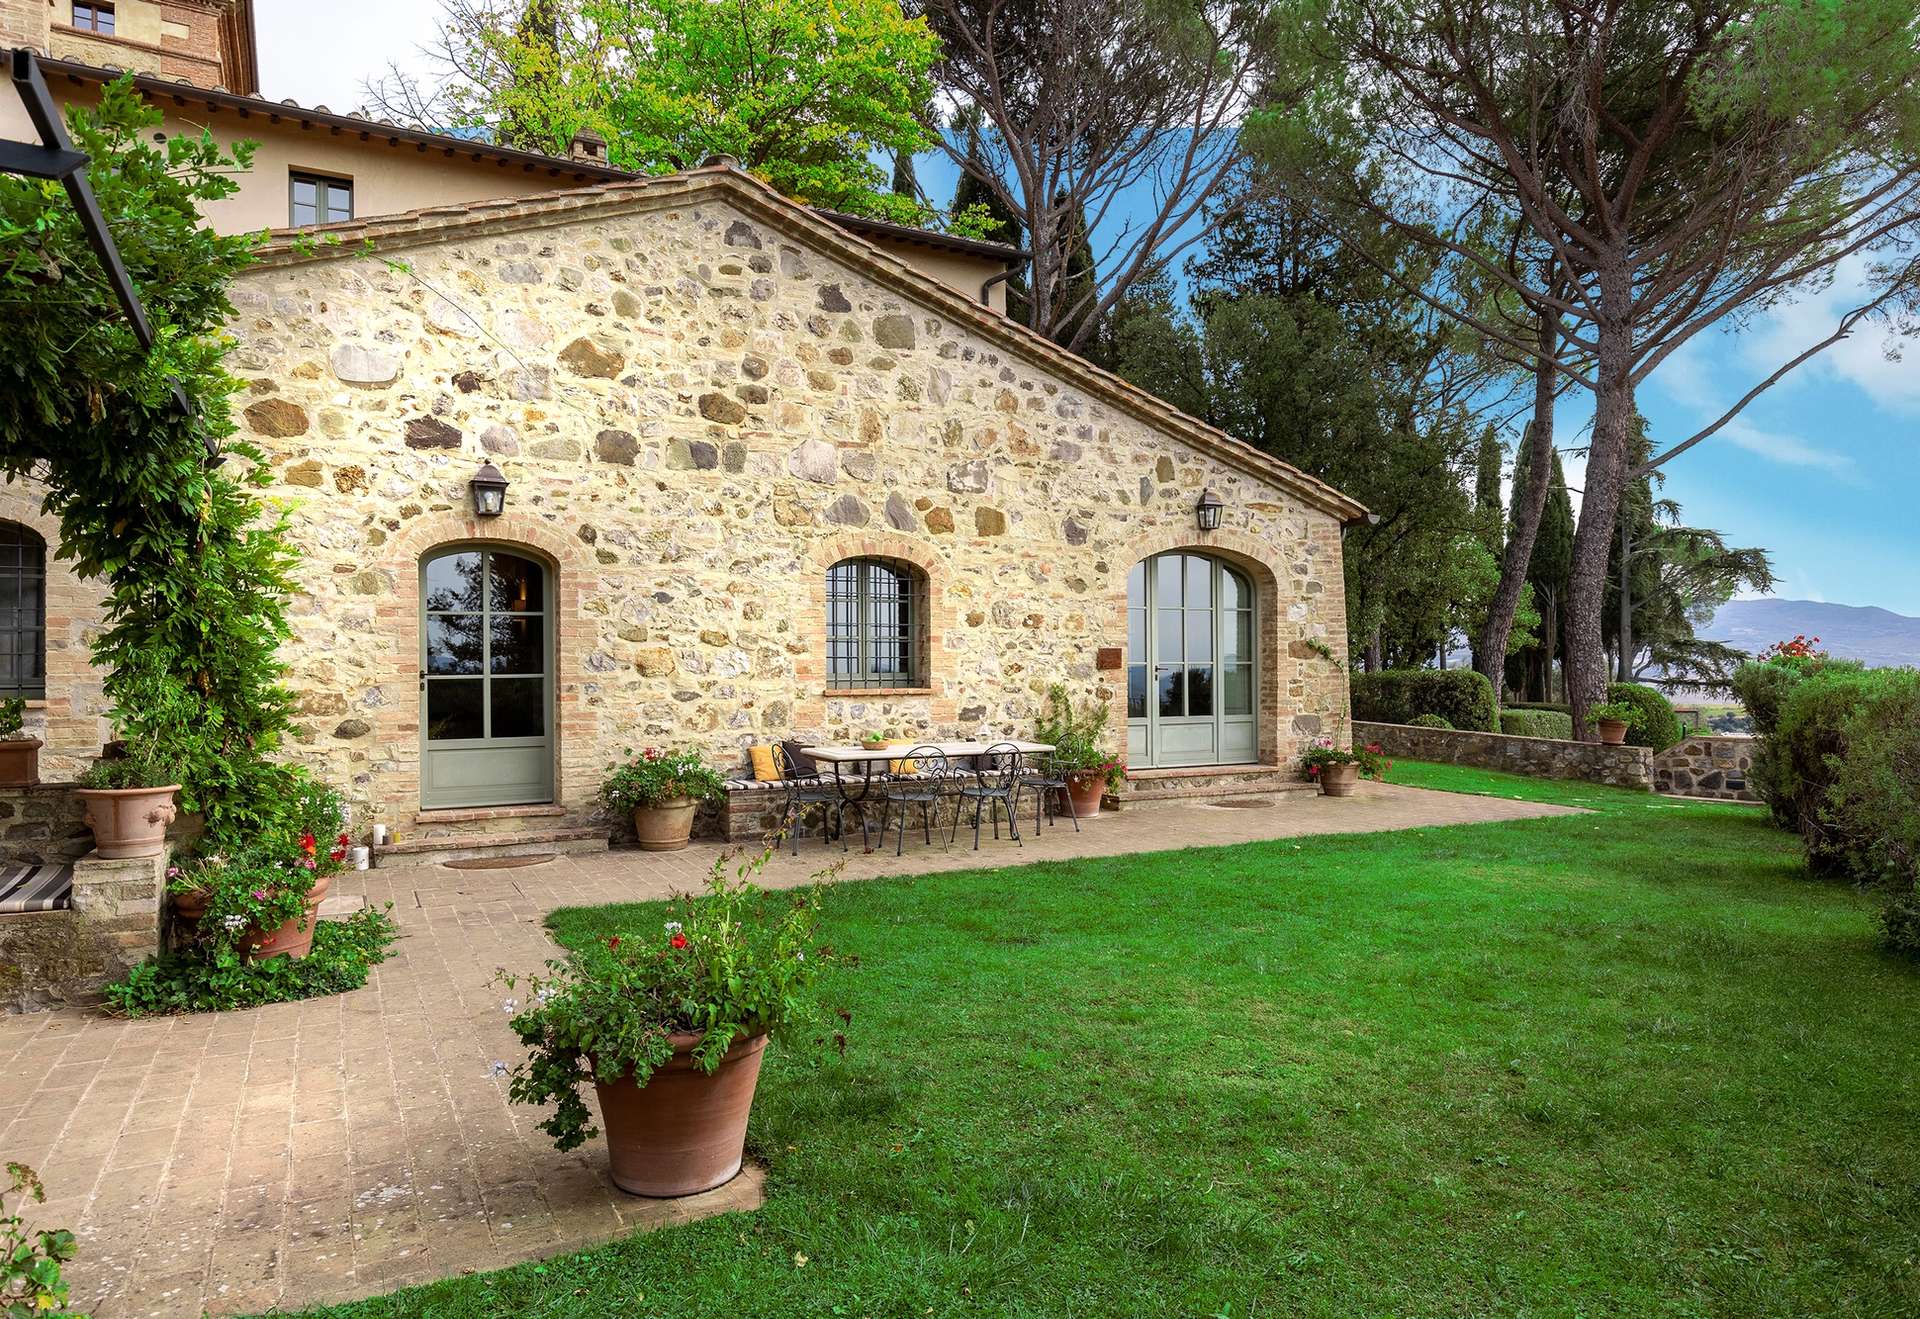 Typical Tuscan farmhouse. Here's a characteristic luxury villa for rent